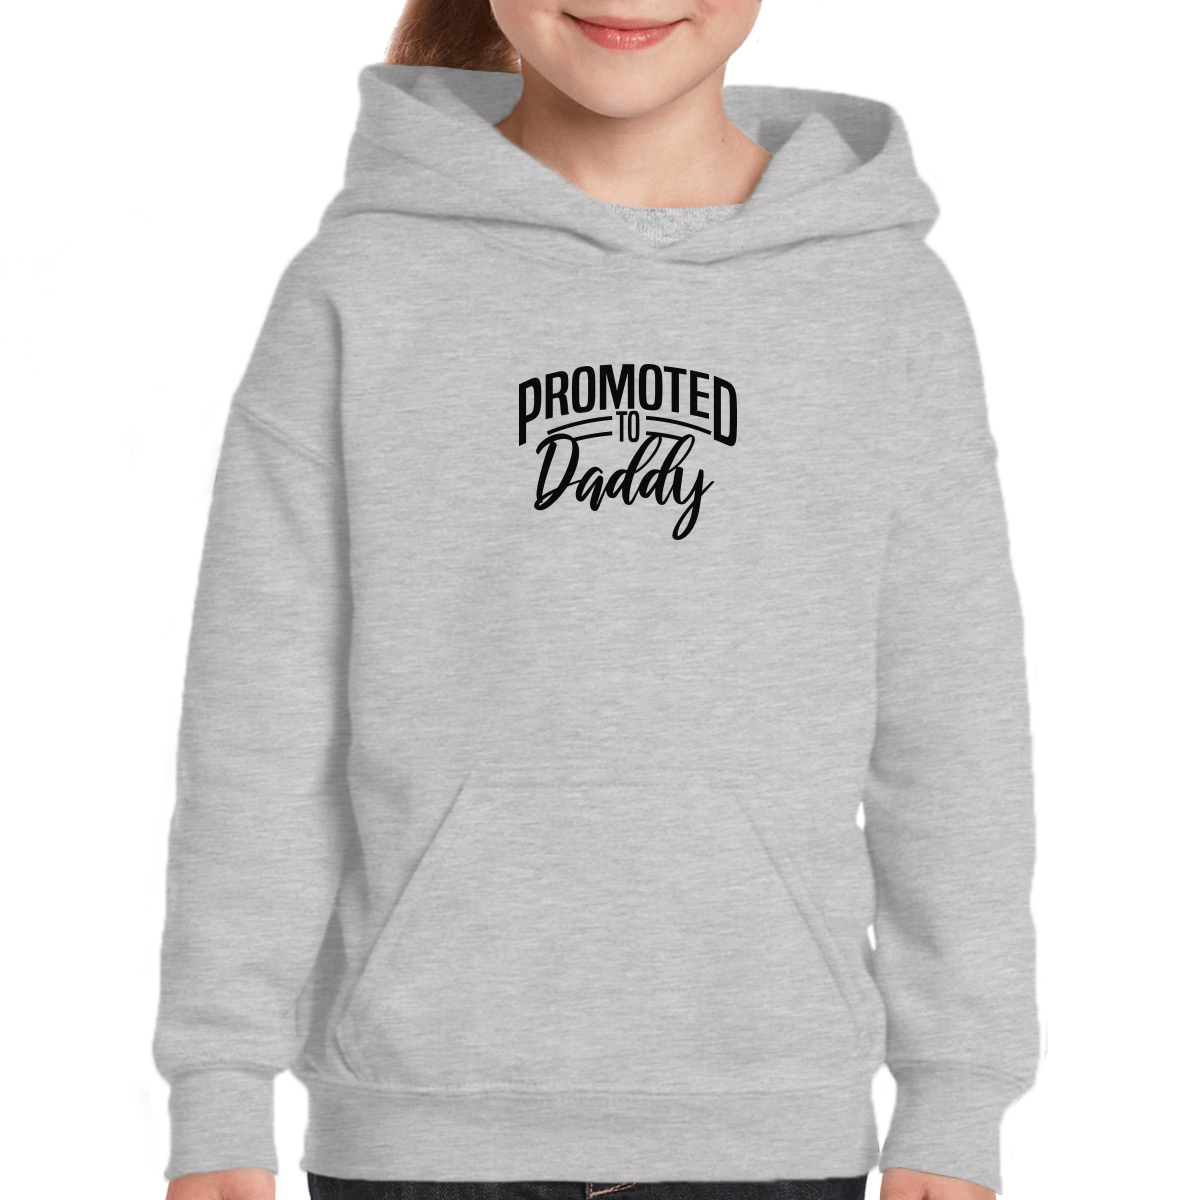 Promoted to daddy Kids Hoodie | Gray